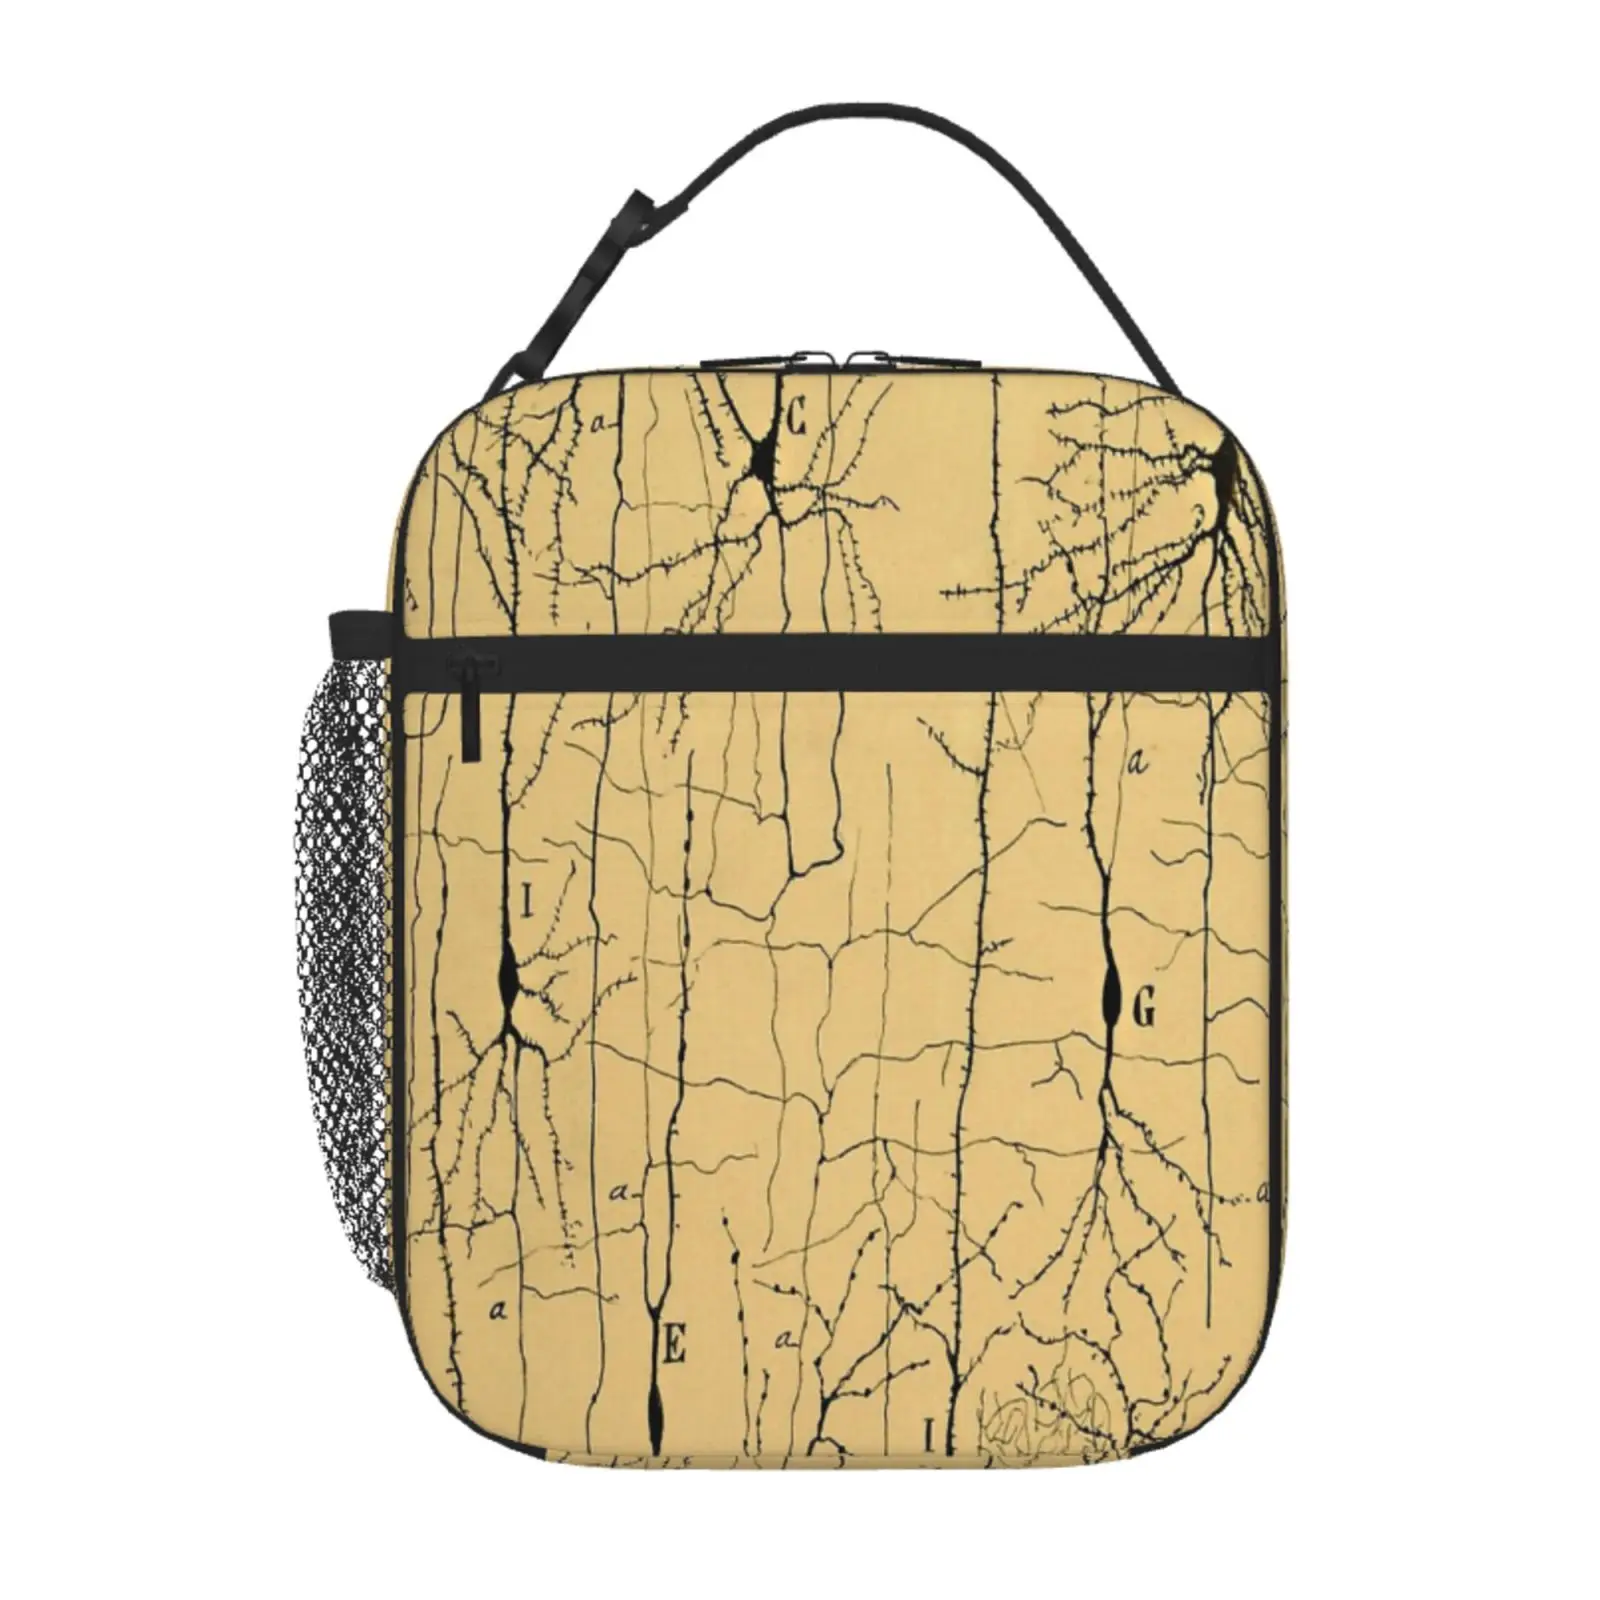 

Drawing Of Nerve Cells By Santiago Ramn Y Cajal Lunch Thermal Bag Thermal Lunch Bag Lunch Bags Bags Thermal Bags